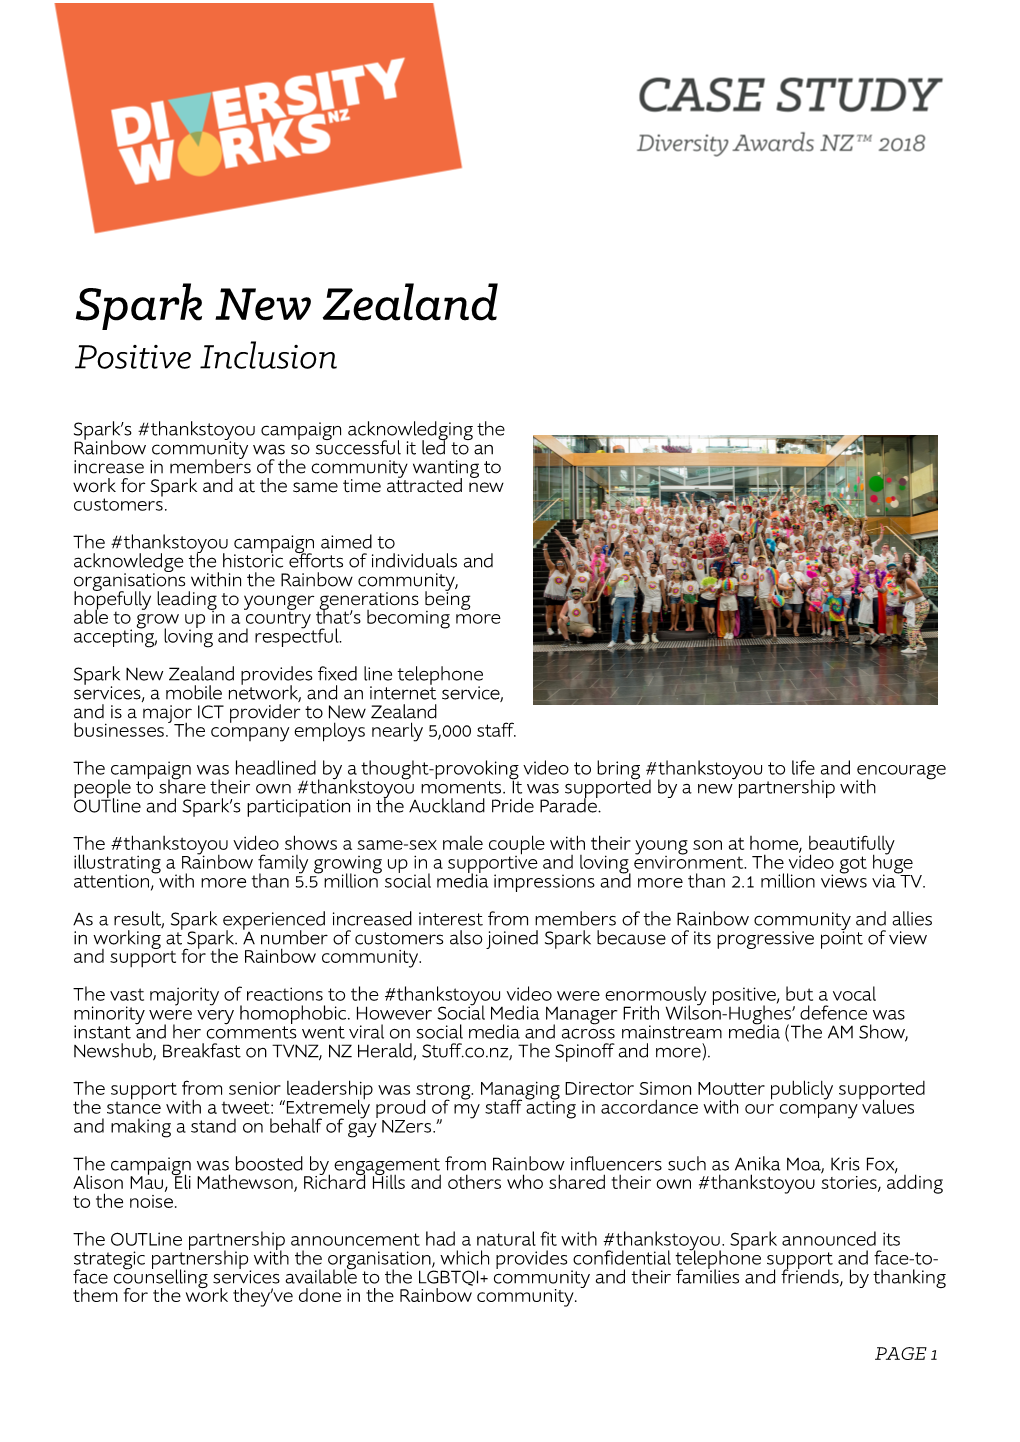 Spark New Zealand Positive Inclusion